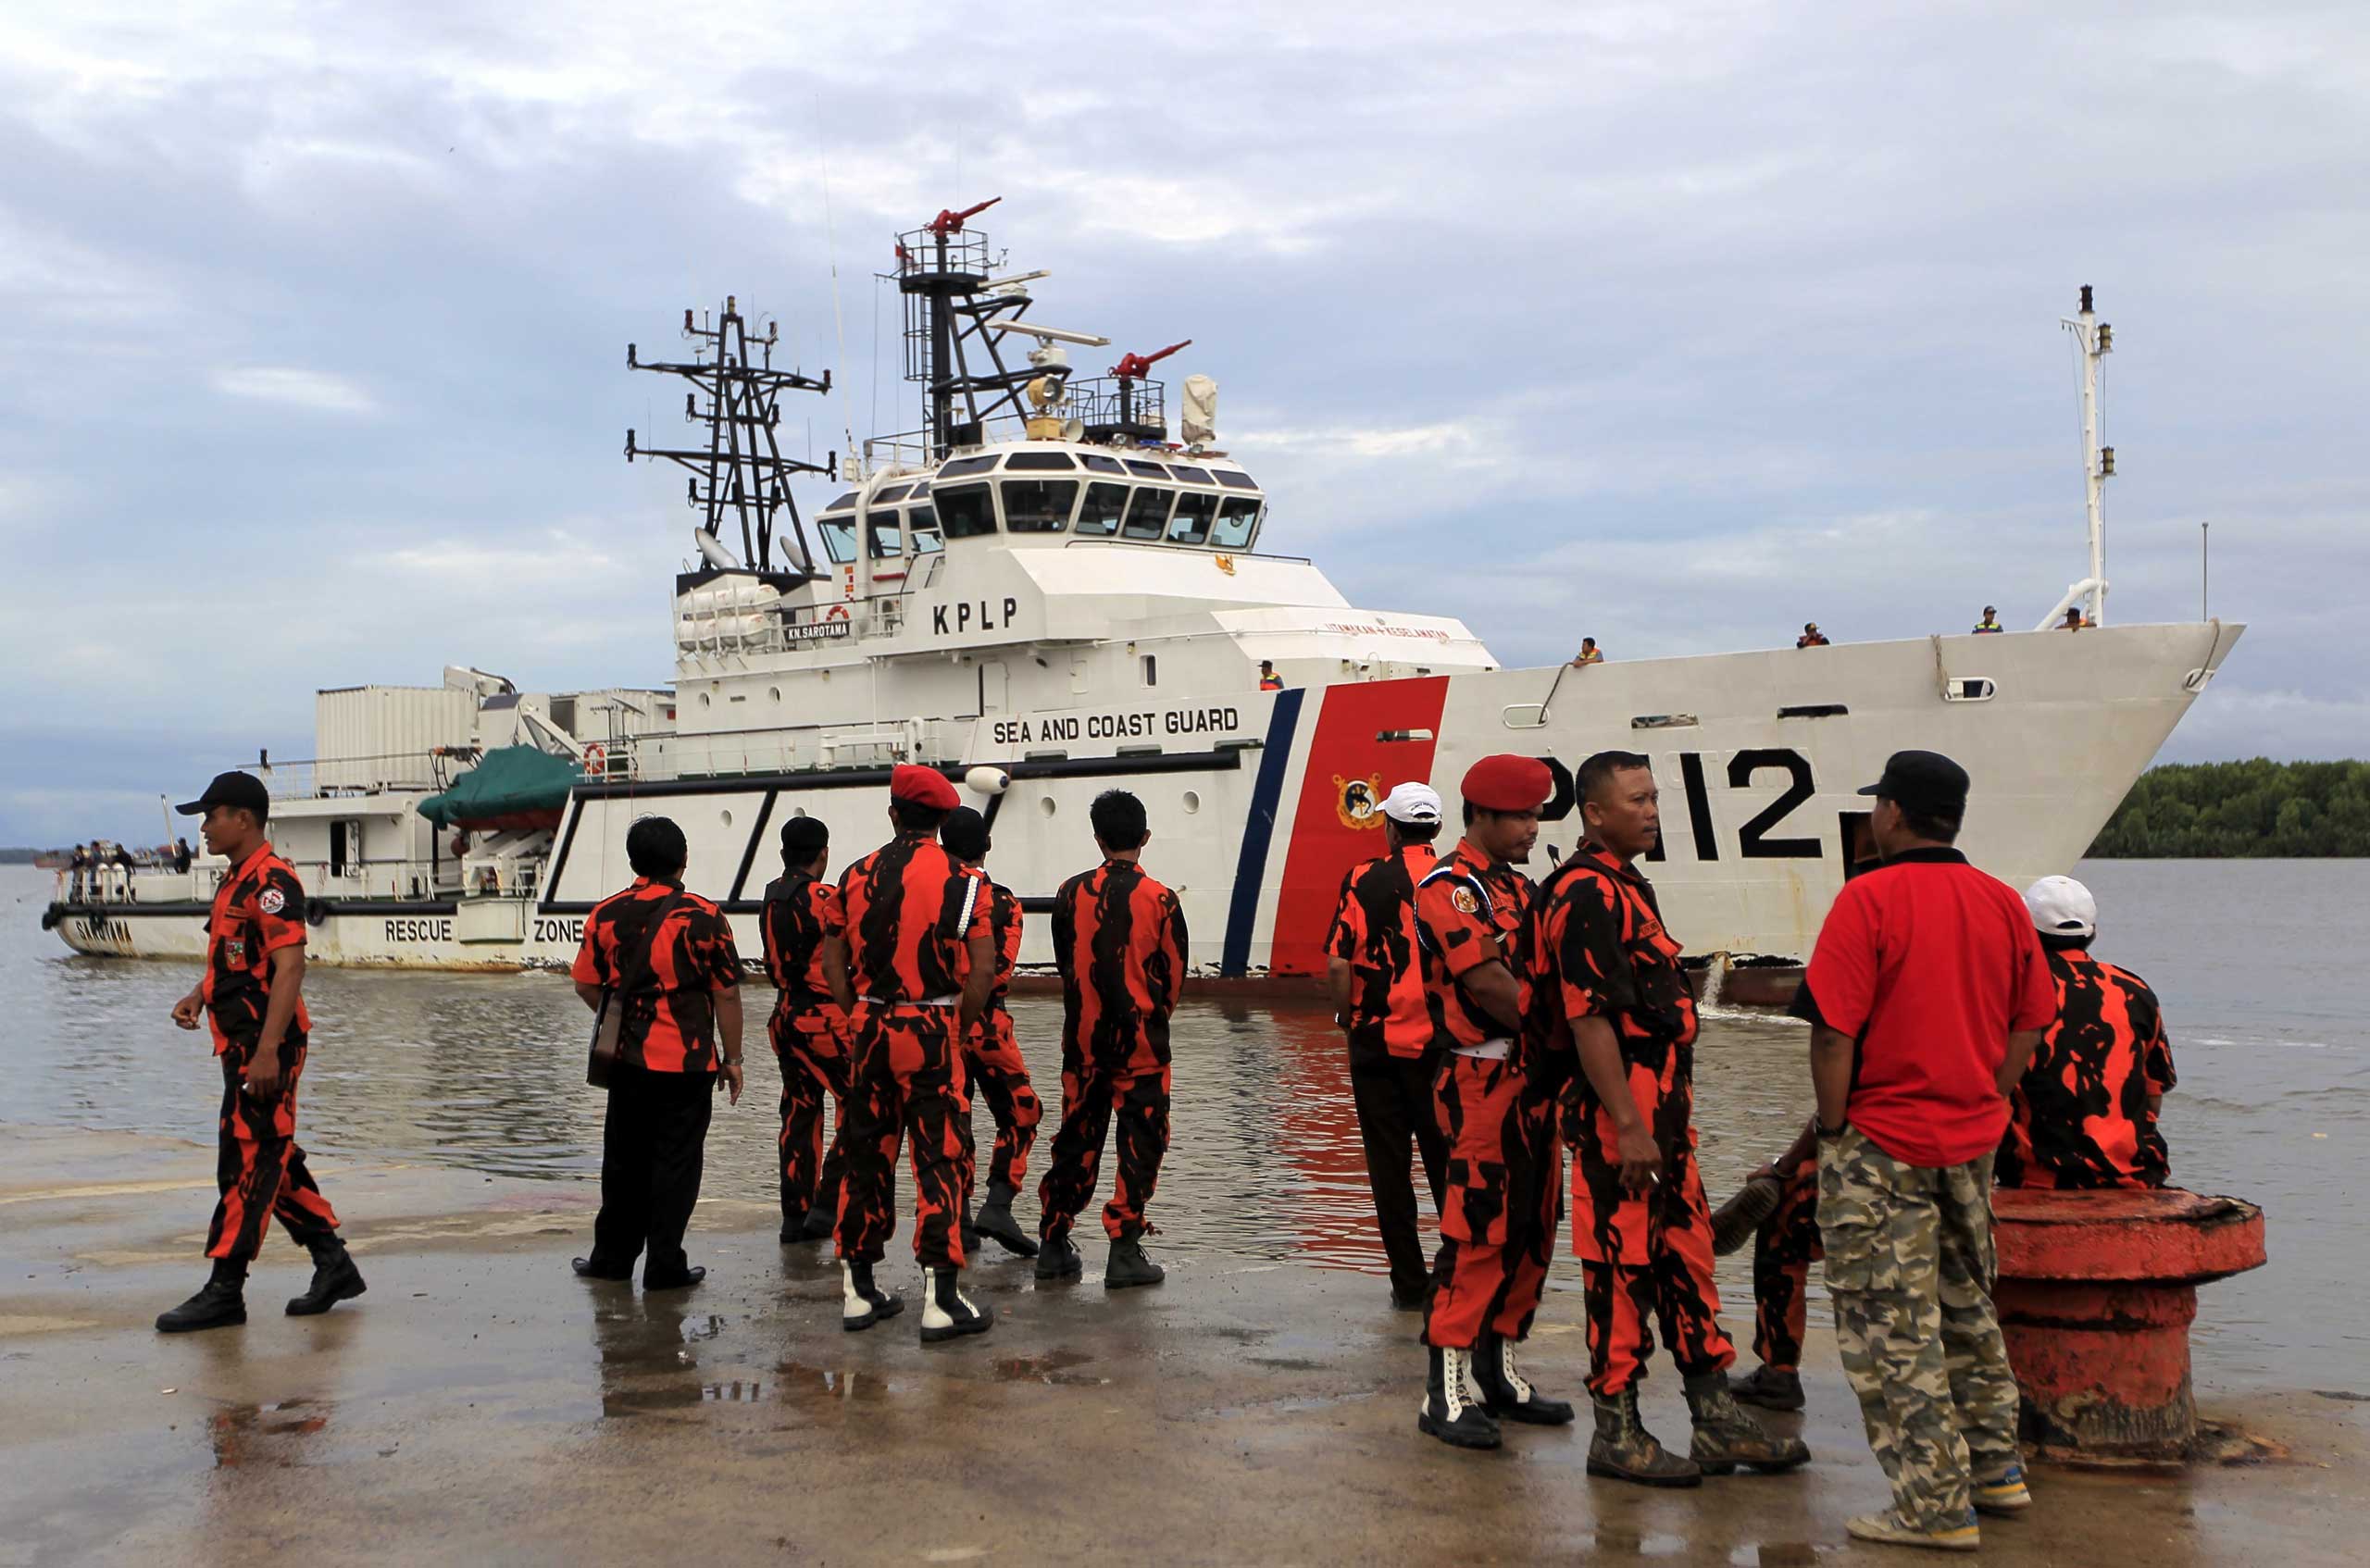 Indonesia's Sea and Coast Guard ship  during a search and rescue operation as they search for the missing AirAsia plane on Dec. 31. (Bagus Indahono—EPA)